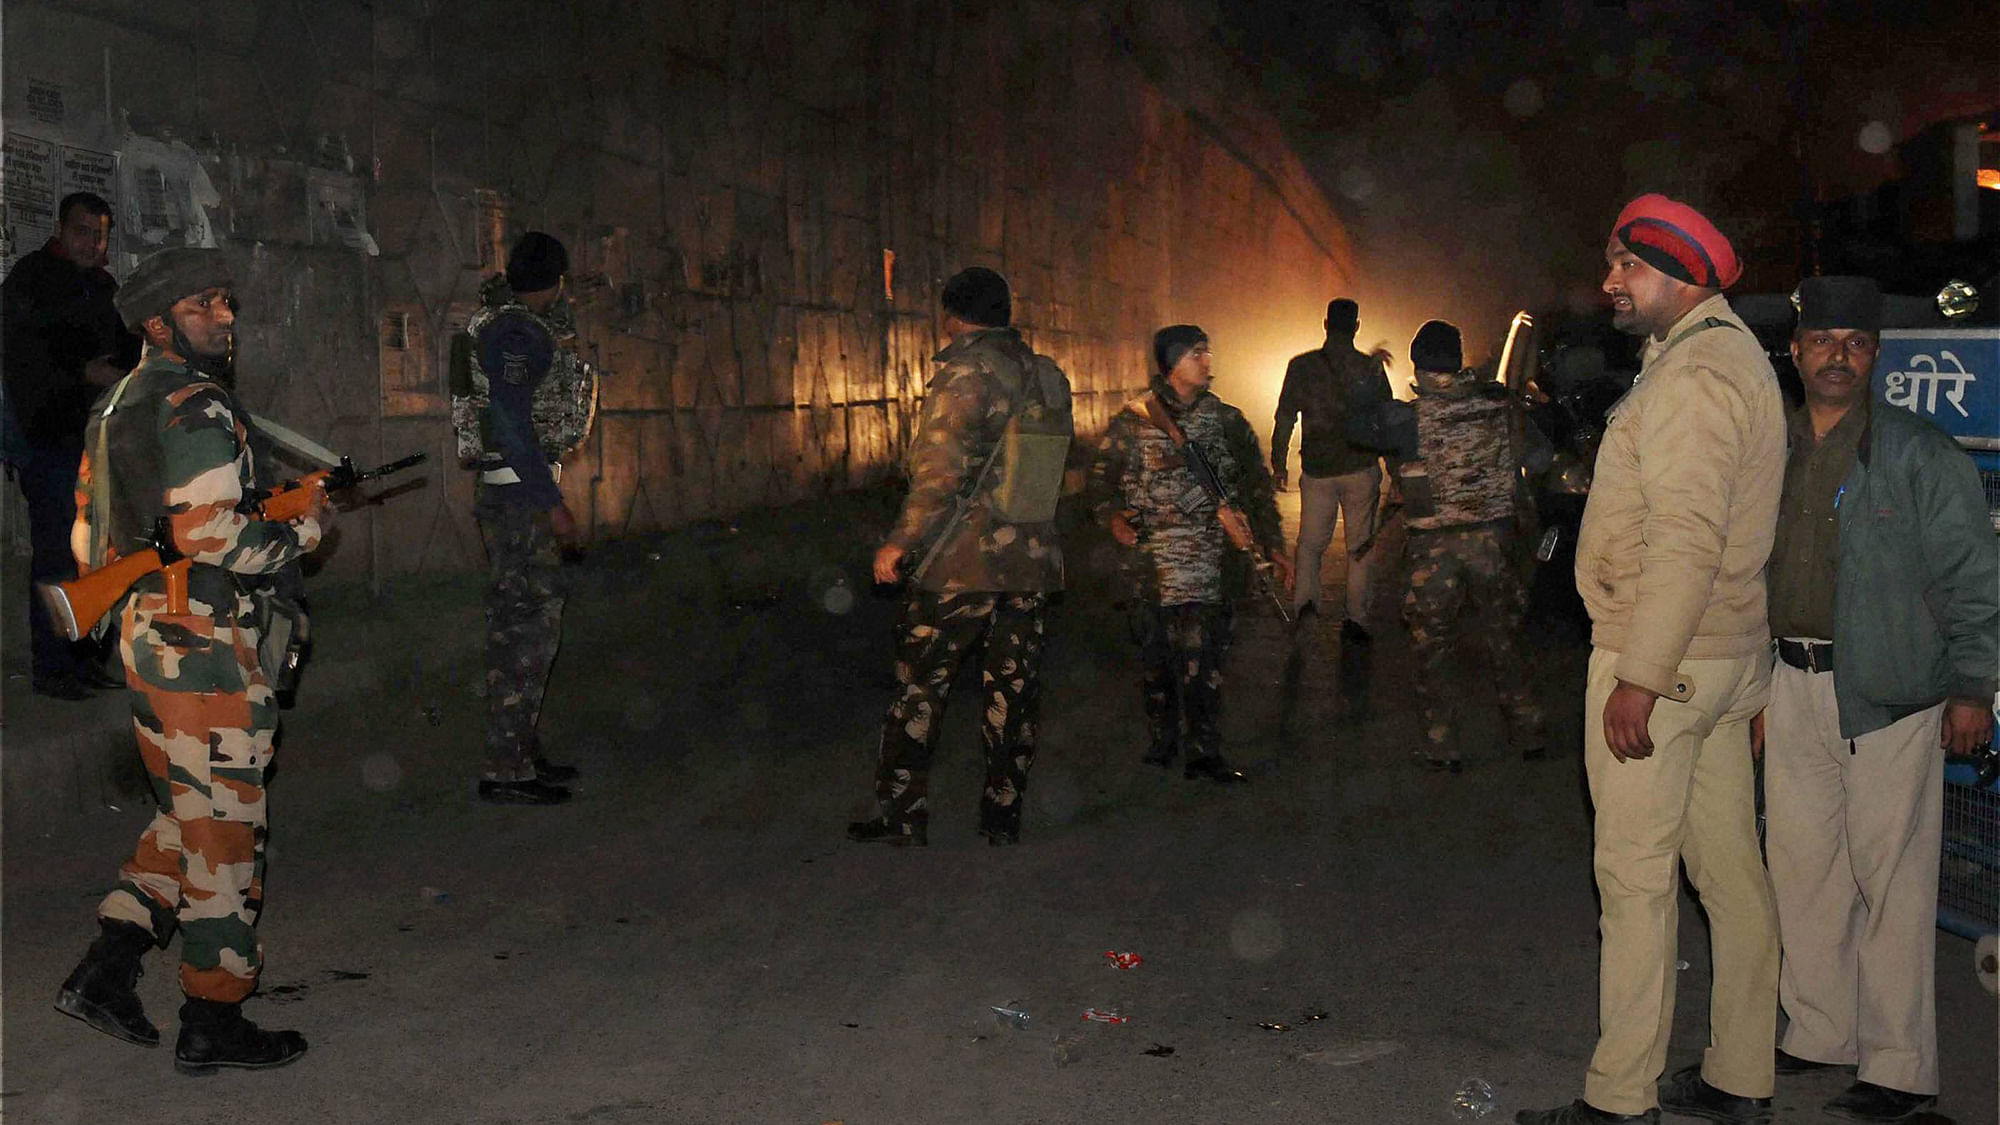 Security forces personnel during their operation against the
militants in Pathankot. (Photo: PTI)